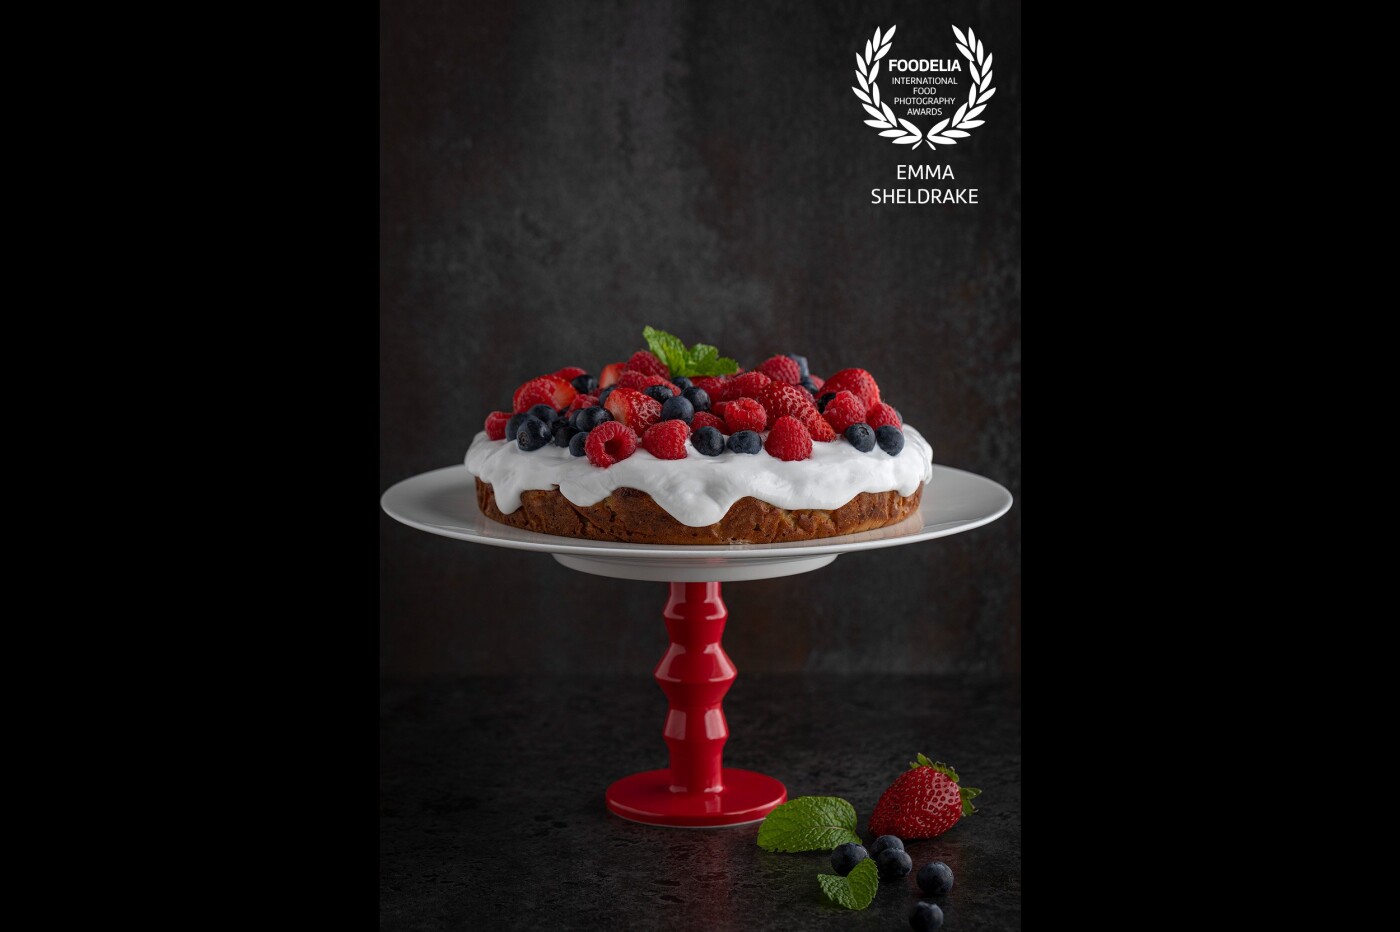 This image was from a series of images created for @changinghabits_hq ‘s new cookbook. For such a simple cake it became quite the hero on stage with dramatic side lighting and adding the red cake stand to the mix. 